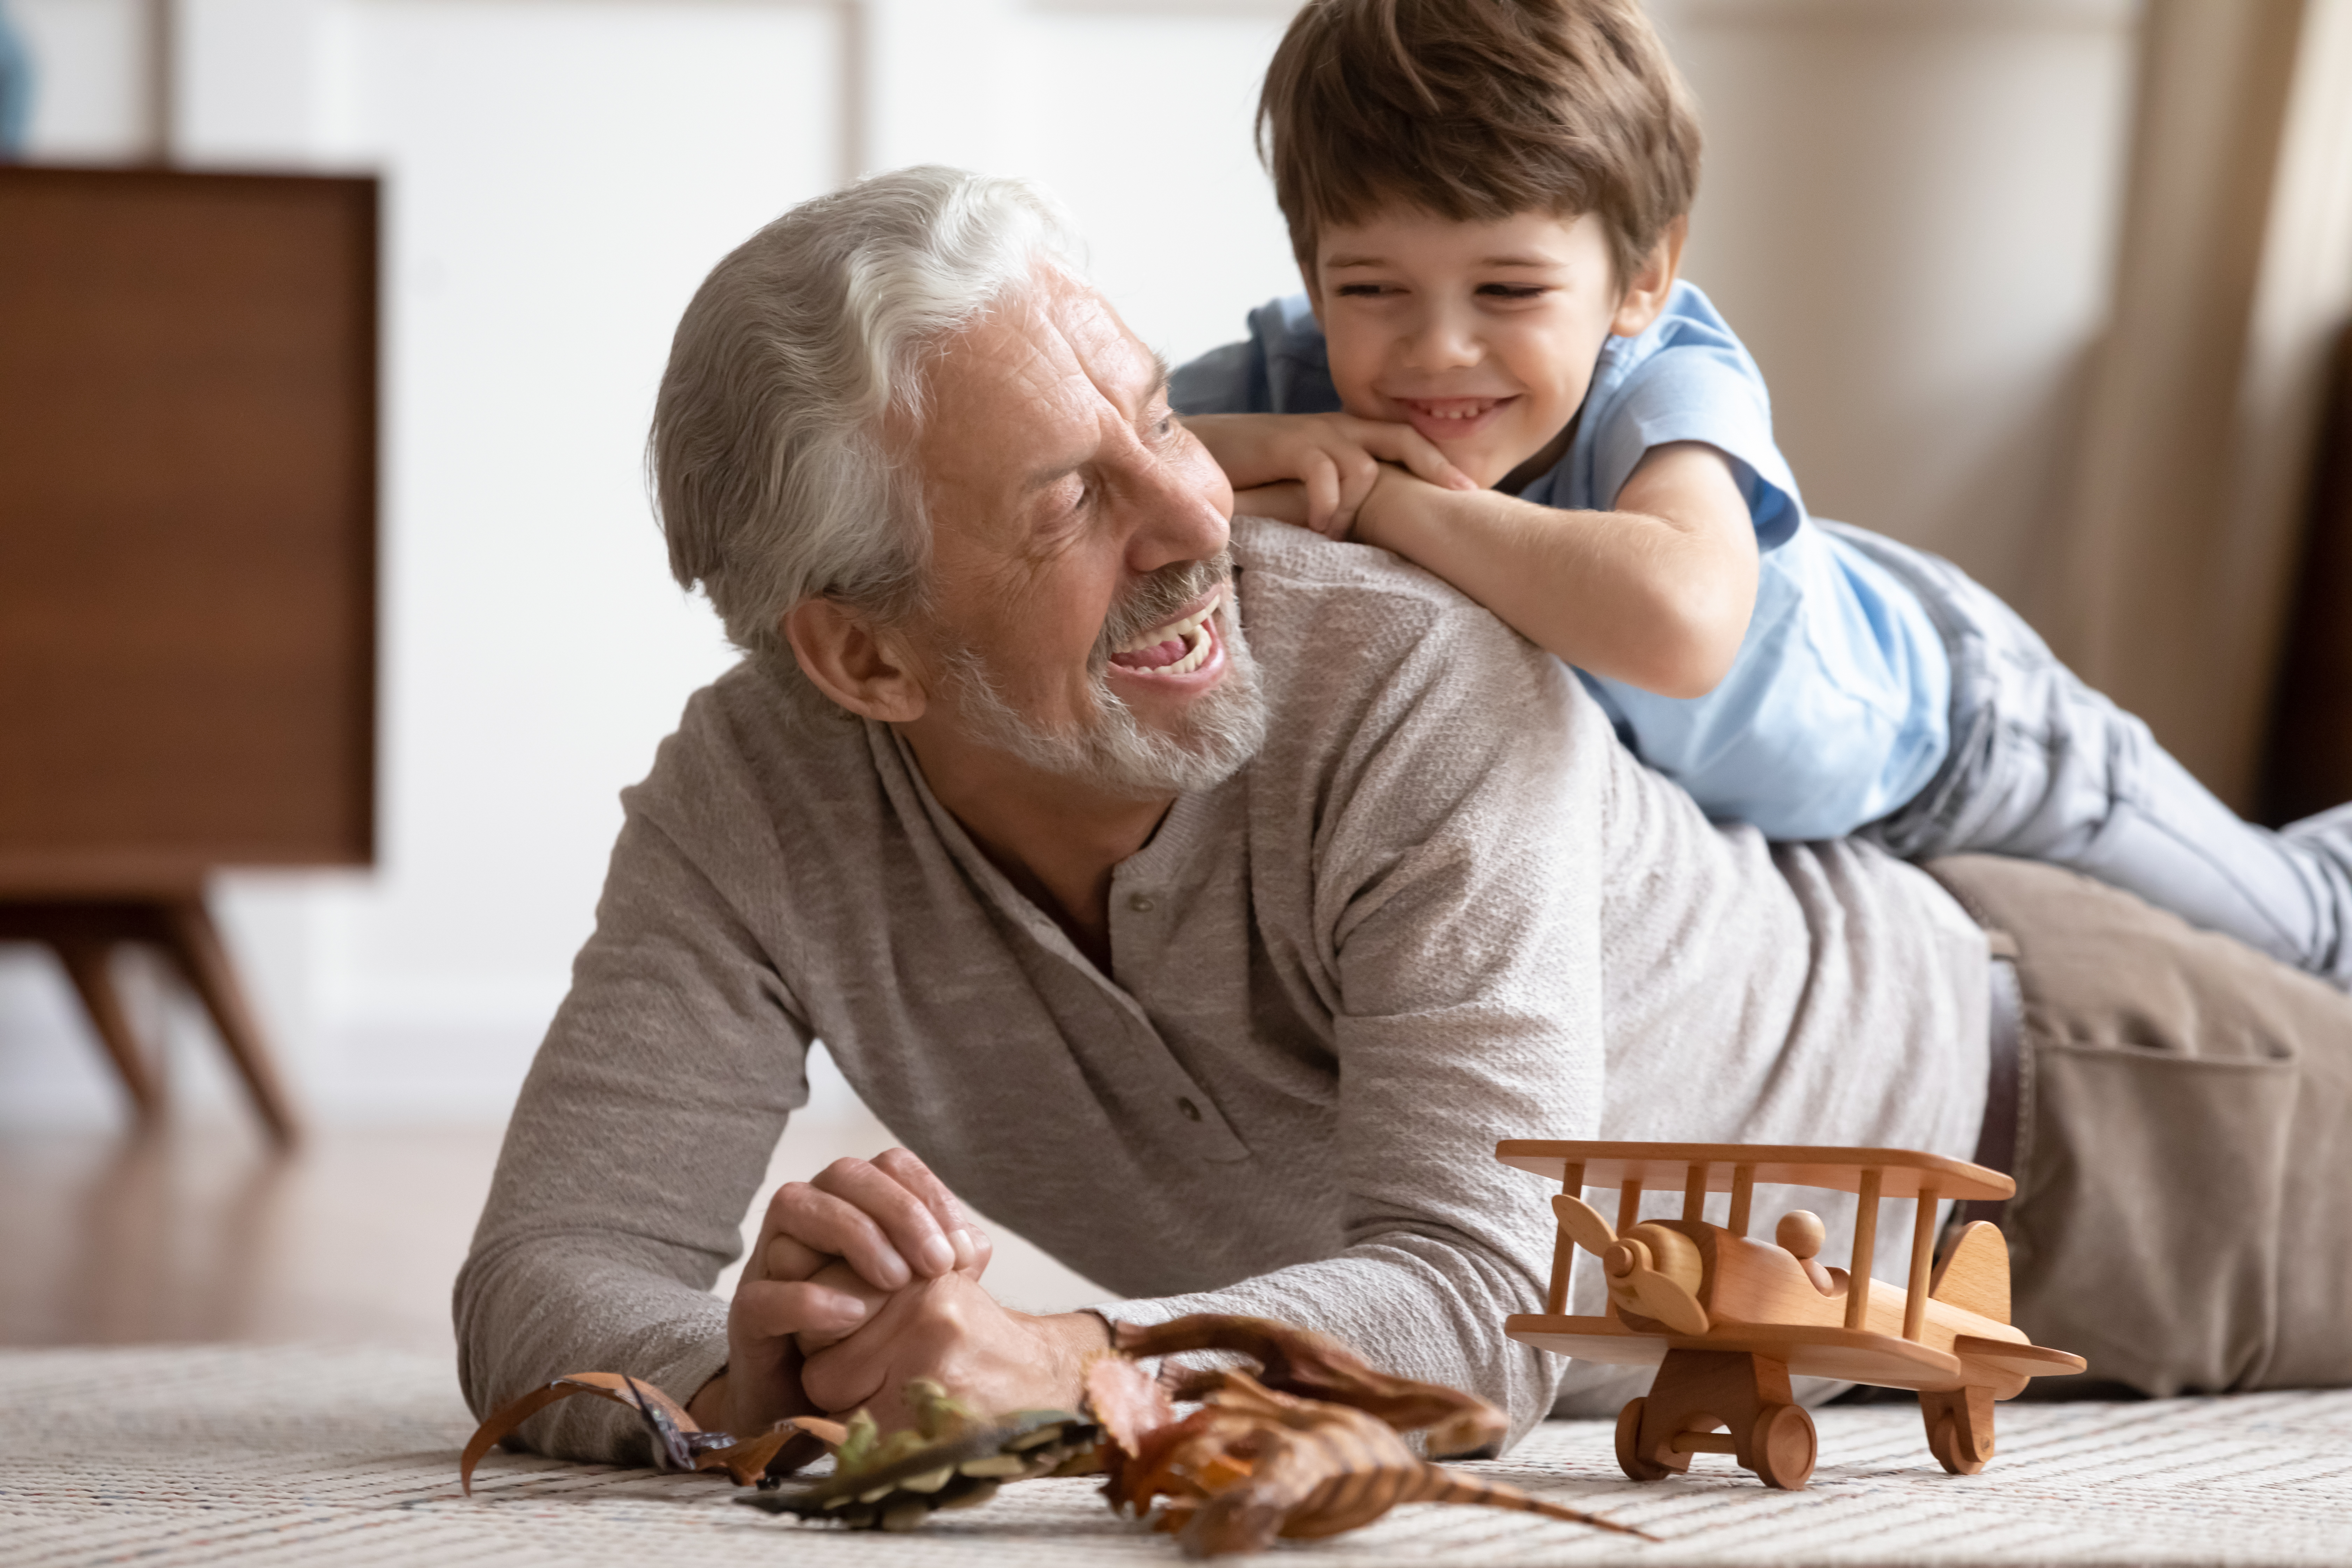 Grandfather playing with his grandson | Source: Shutterstock